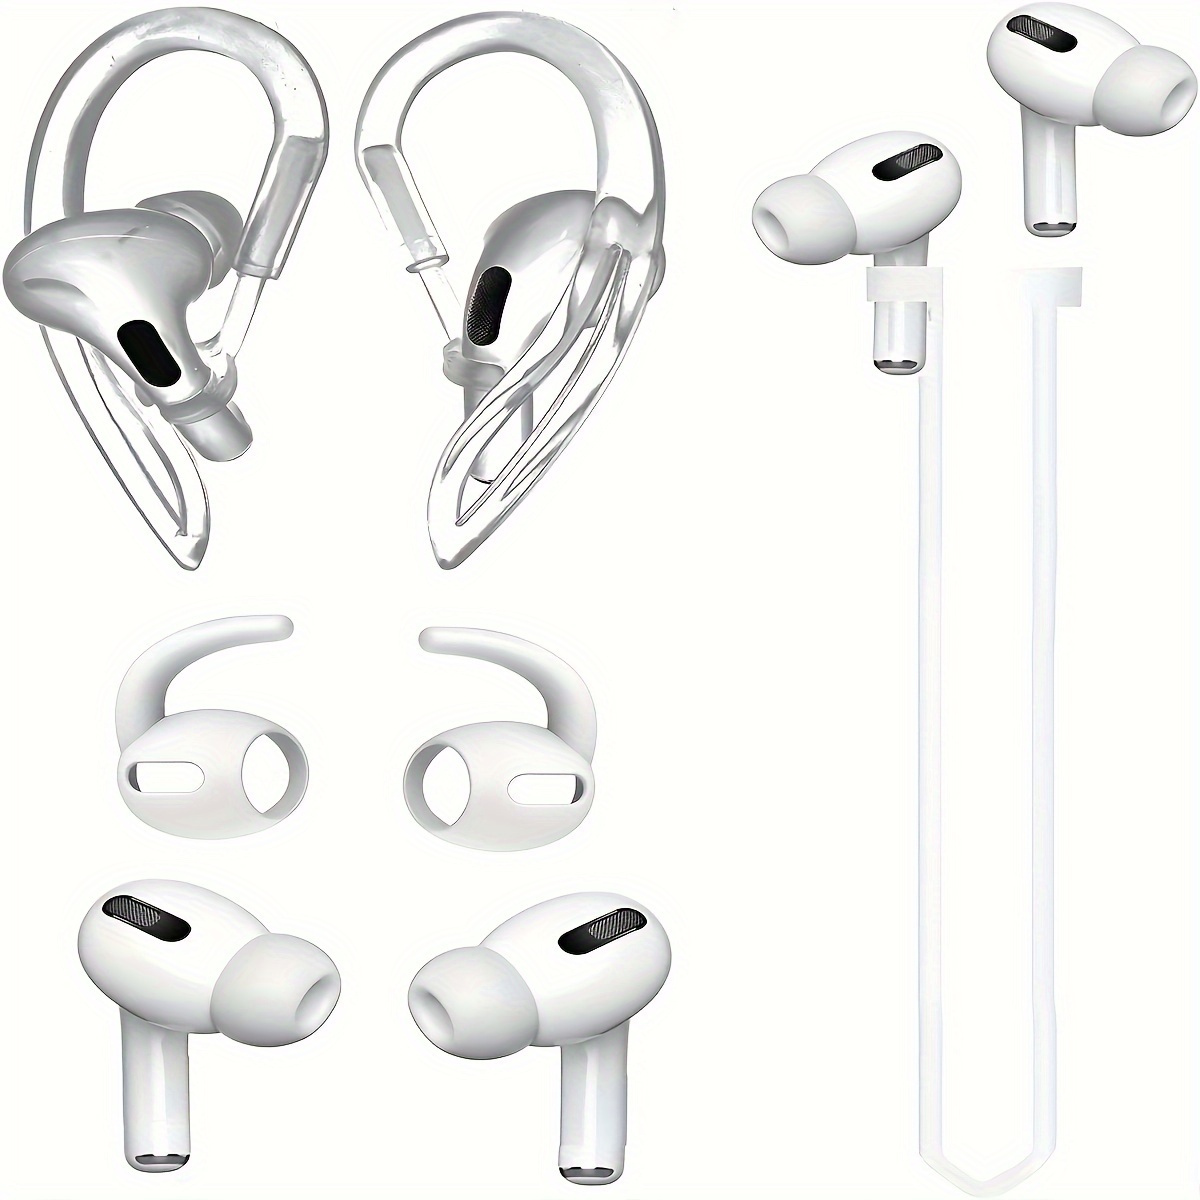 

Earbud Holder, Sport Ear Hook Compatible With Air Pods Pro + Air Pods Pro Earbuds Ear Hooks Cover + Strap Compatible With Air Pods Pro [3 In 1]